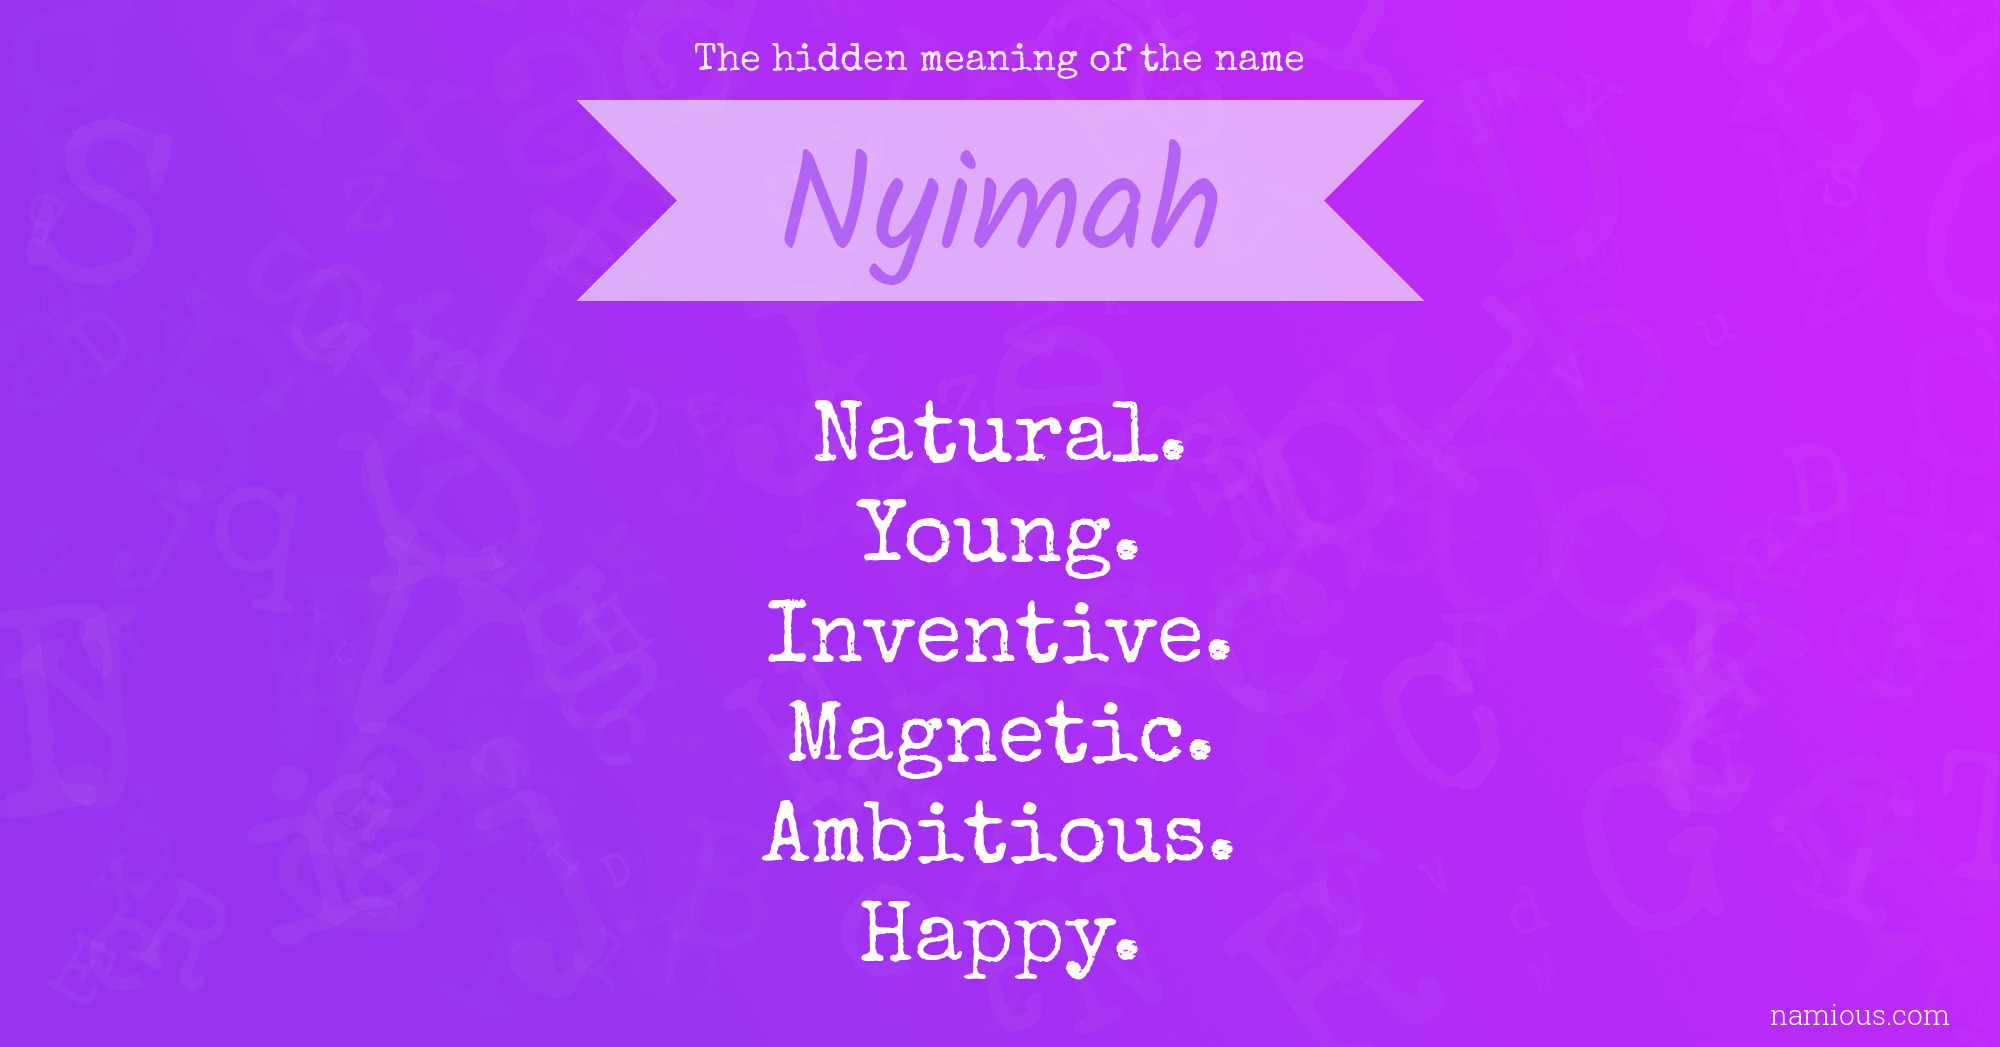 The hidden meaning of the name Nyimah